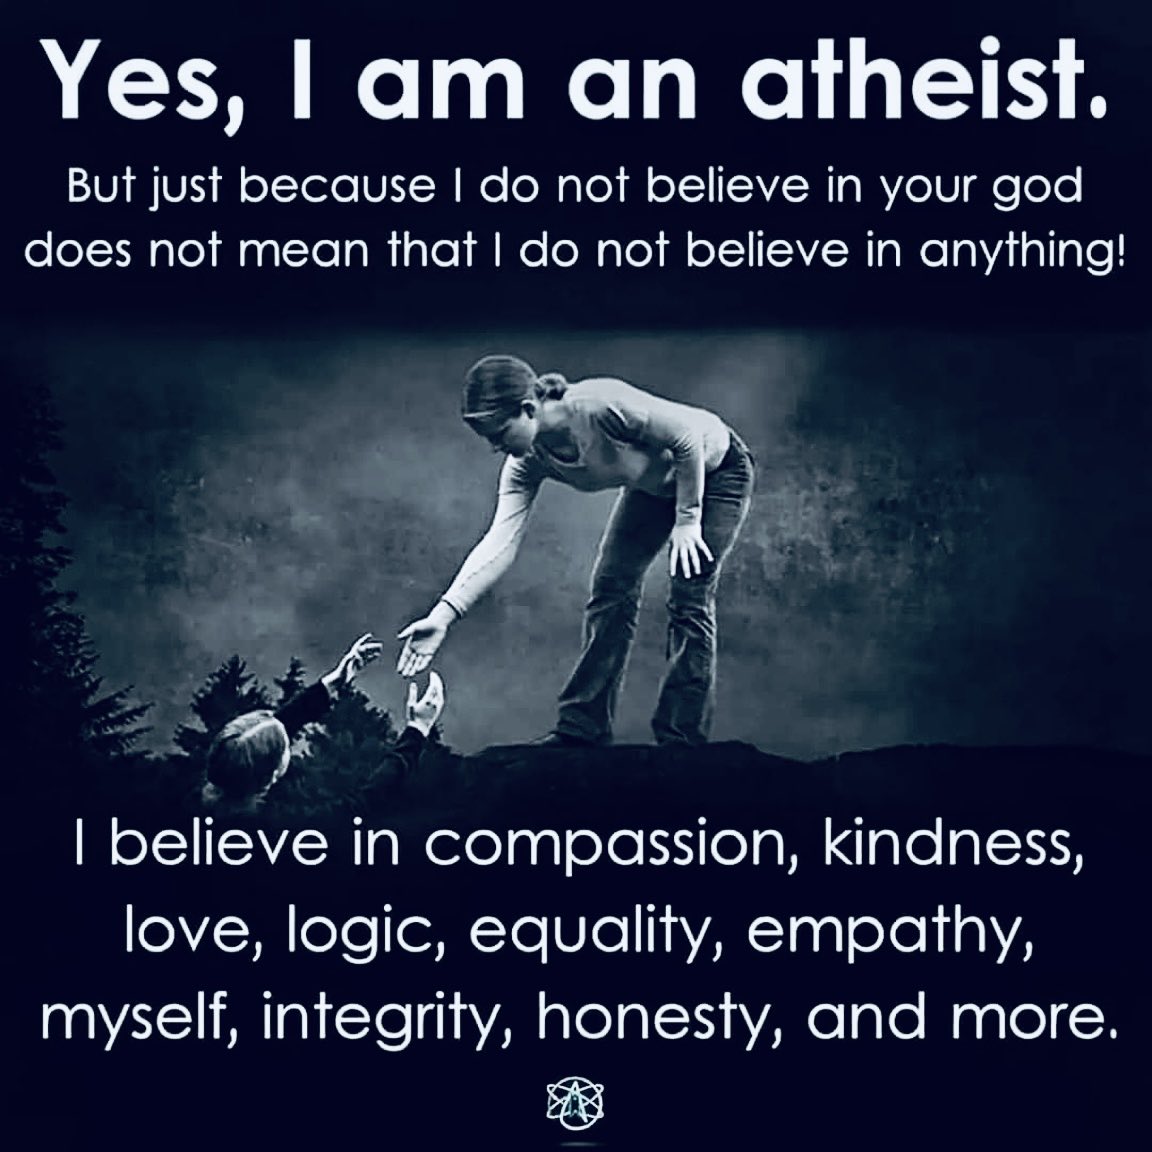 I. Am. An. Atheist. 

And damn proud of it.